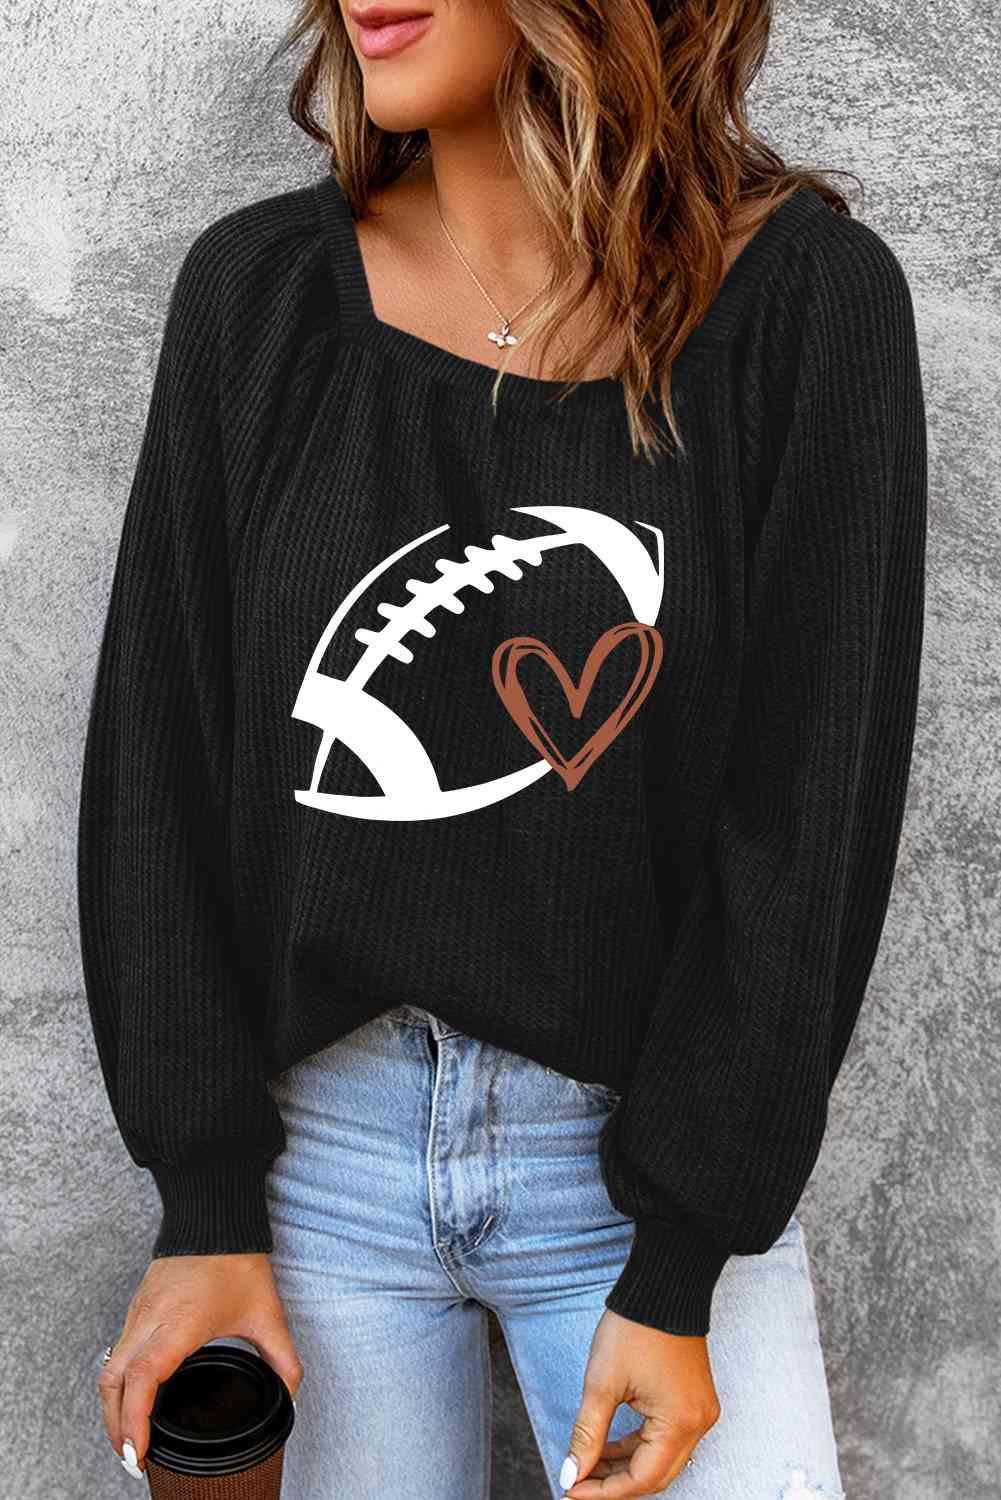 a woman wearing a black sweater with a football on it